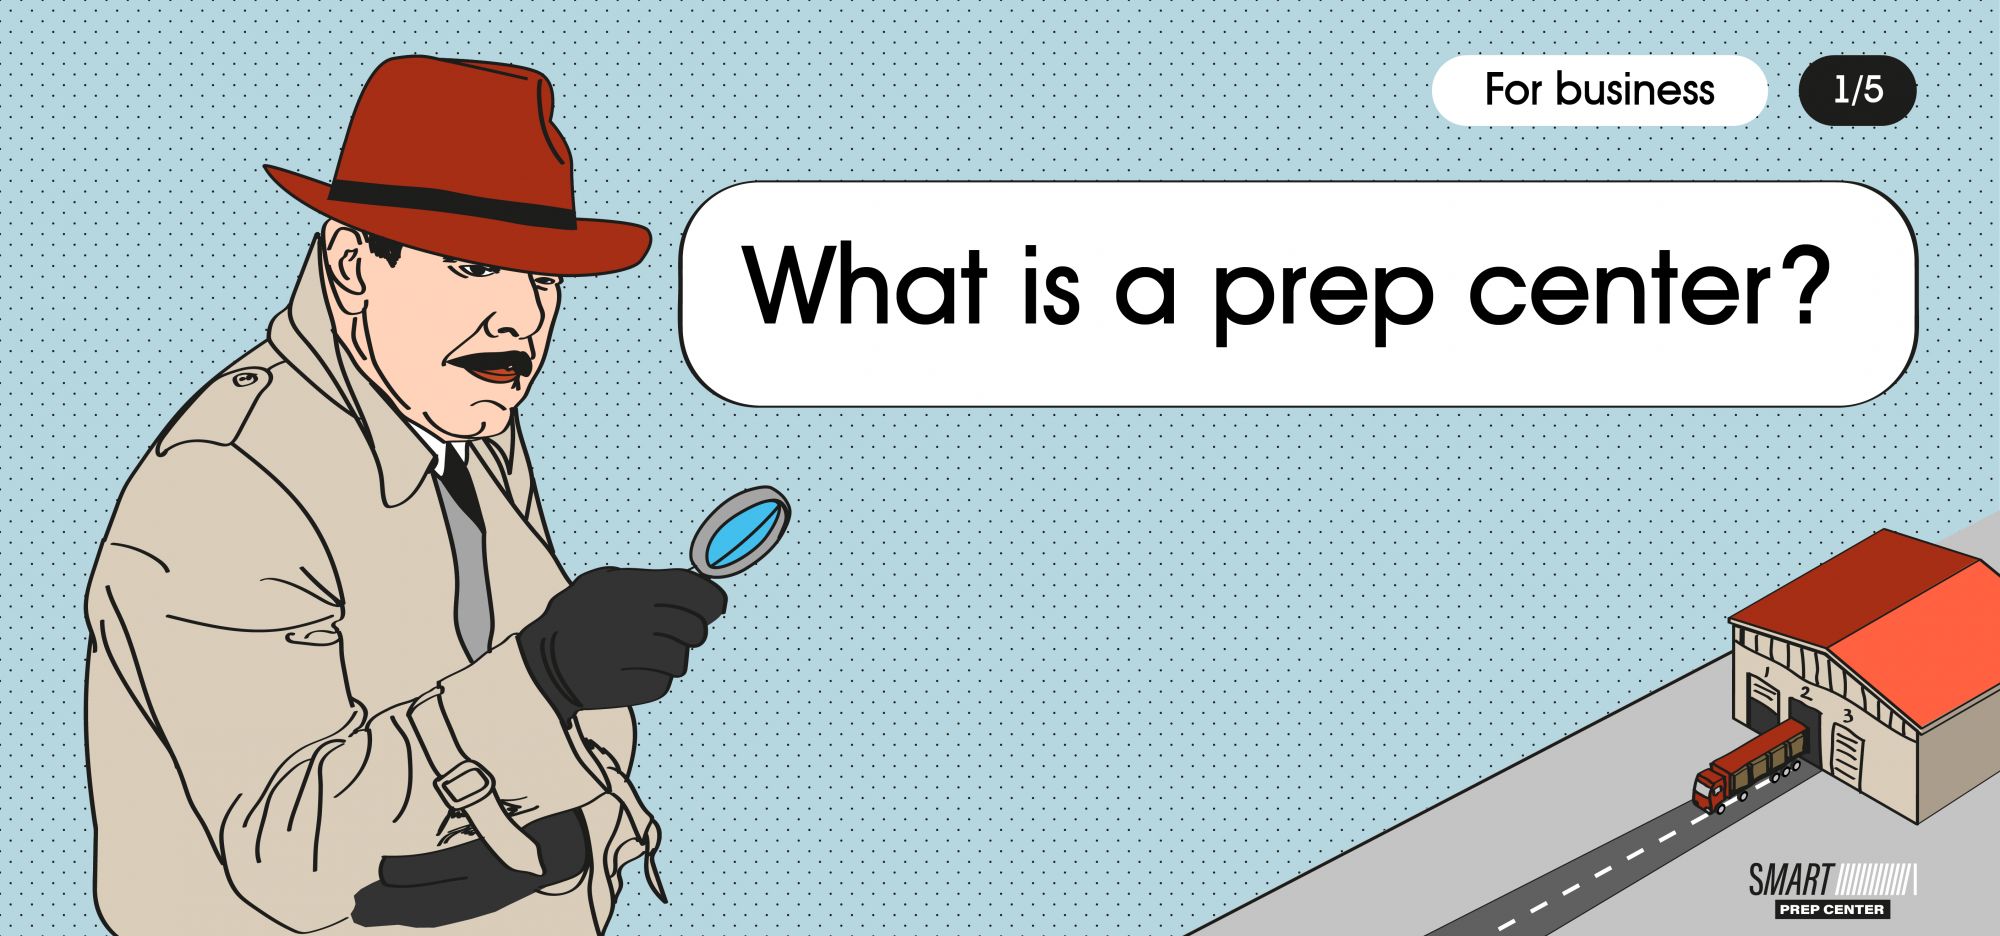 What is a prep center?